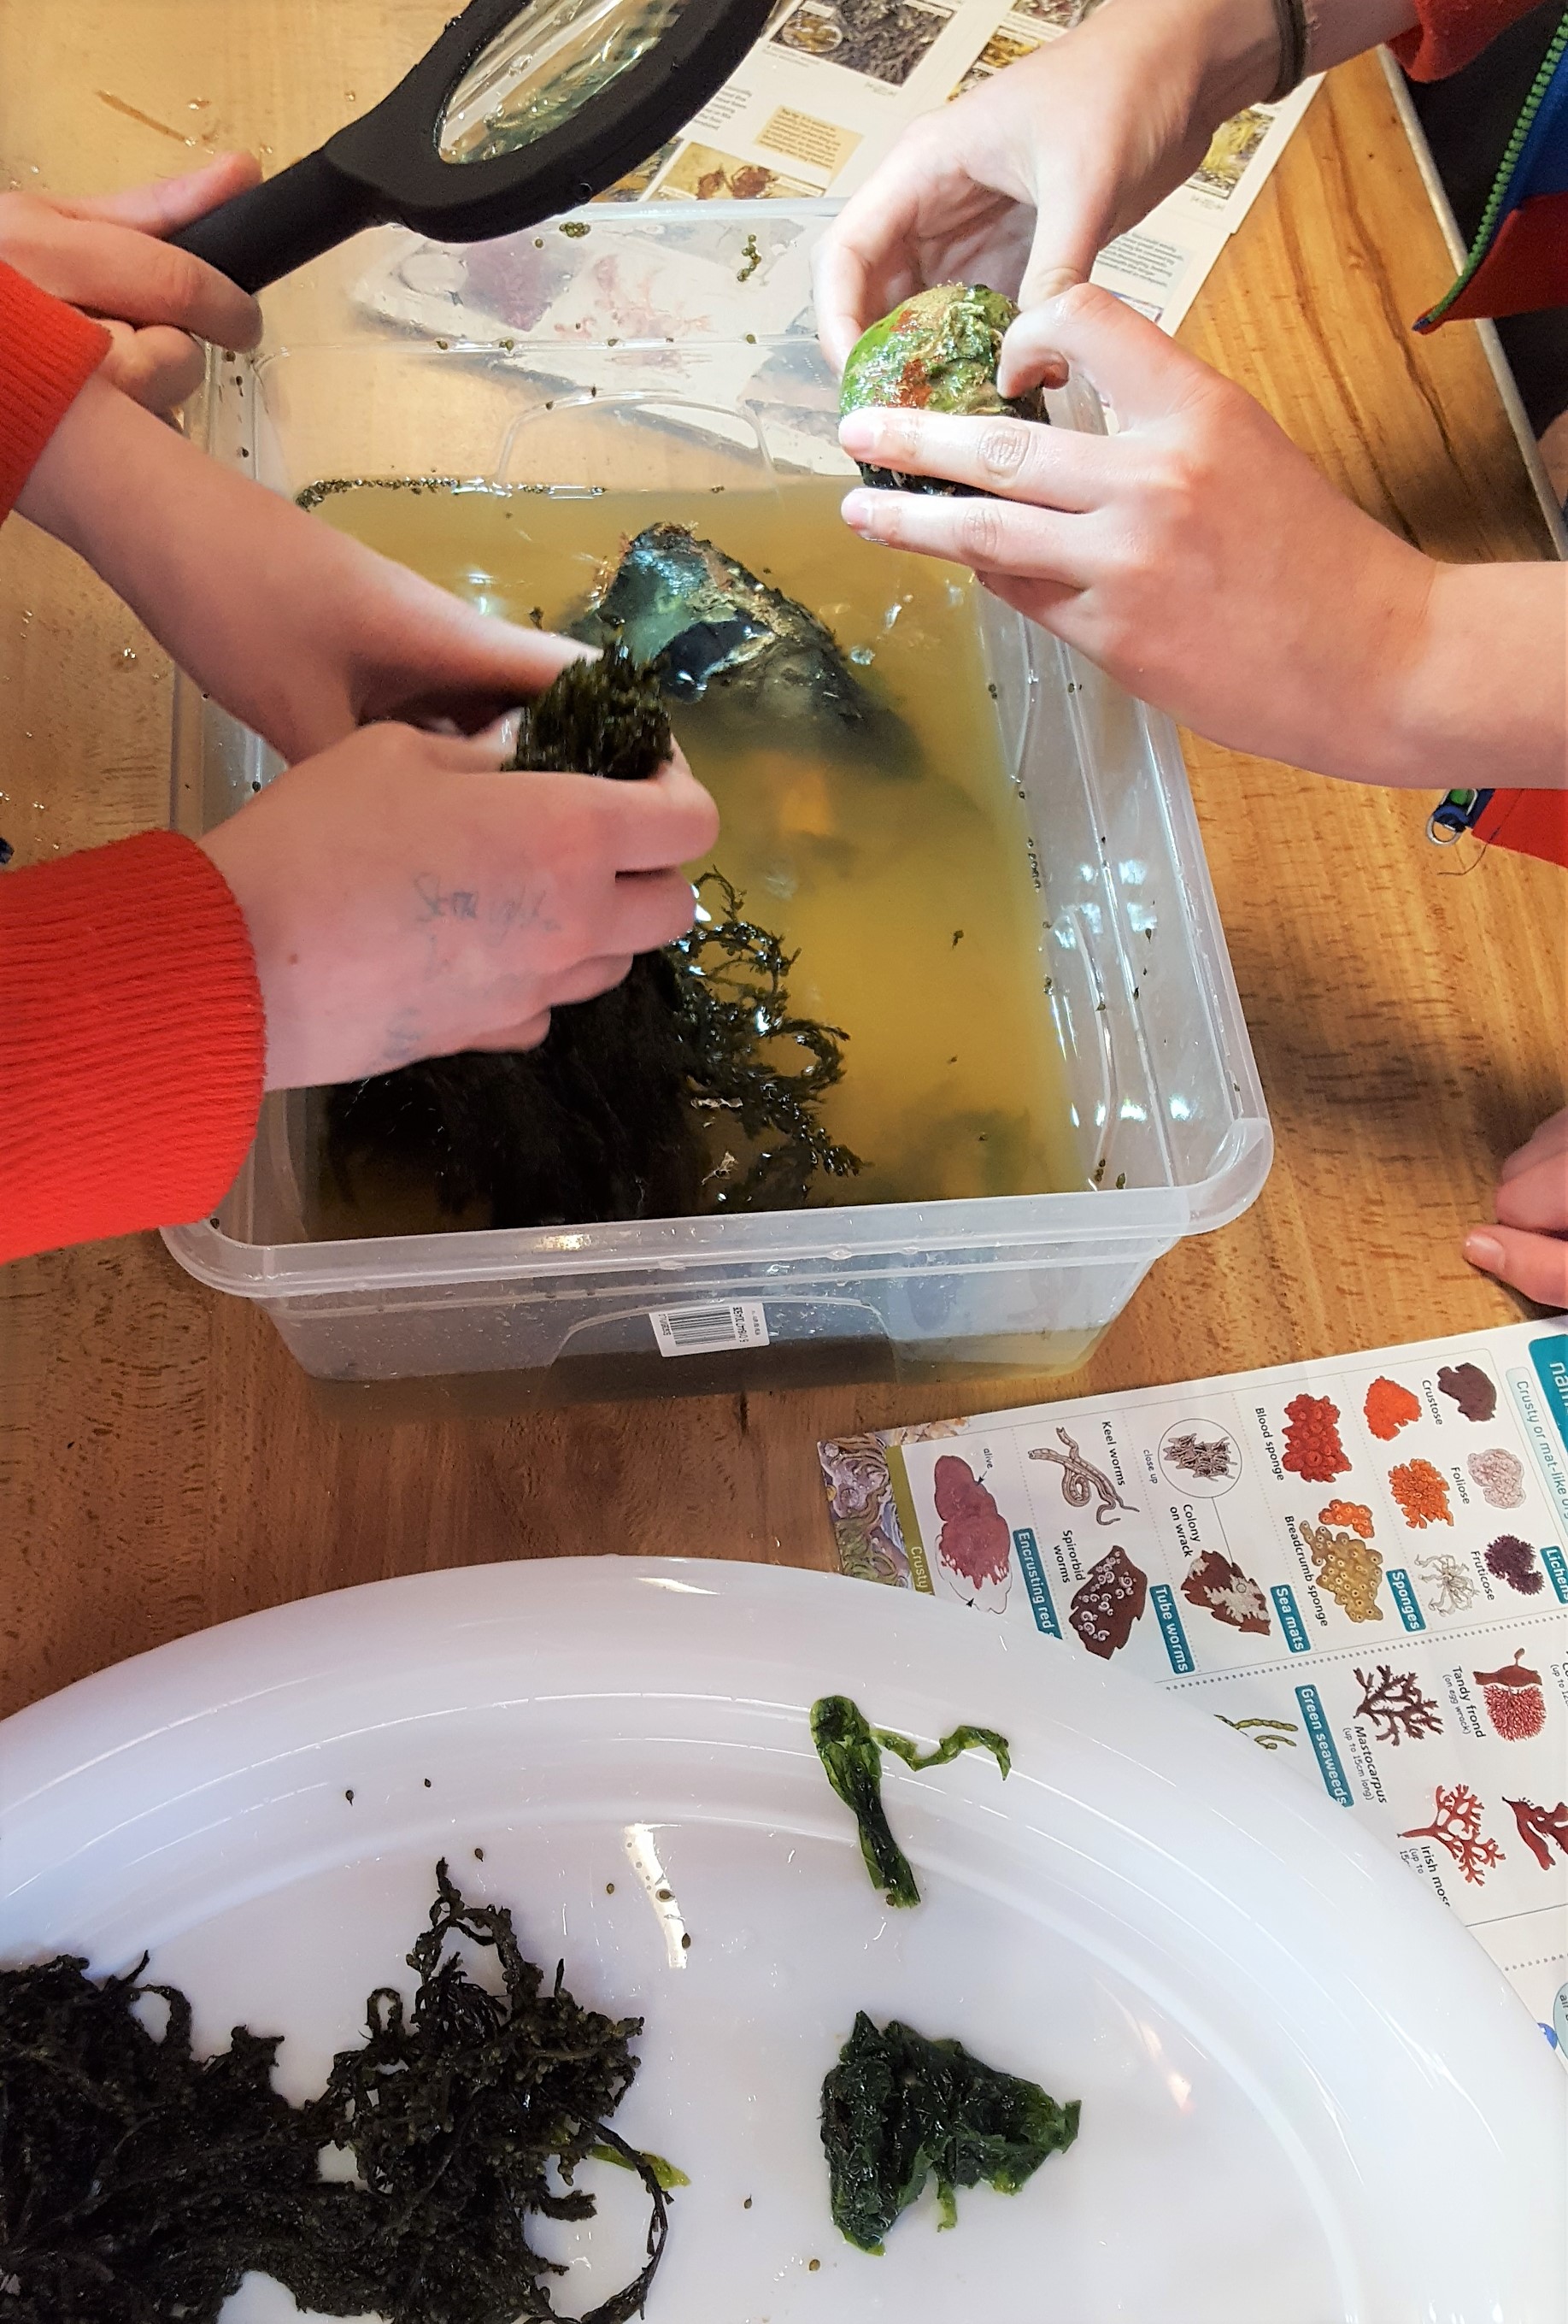 This photo illustrates the setup at the introductory session in 2019. Youth handled and smelled samples of seaweeds and had access to tools such as ID guides and magnifying glasses to support their identification of the seaweeds.